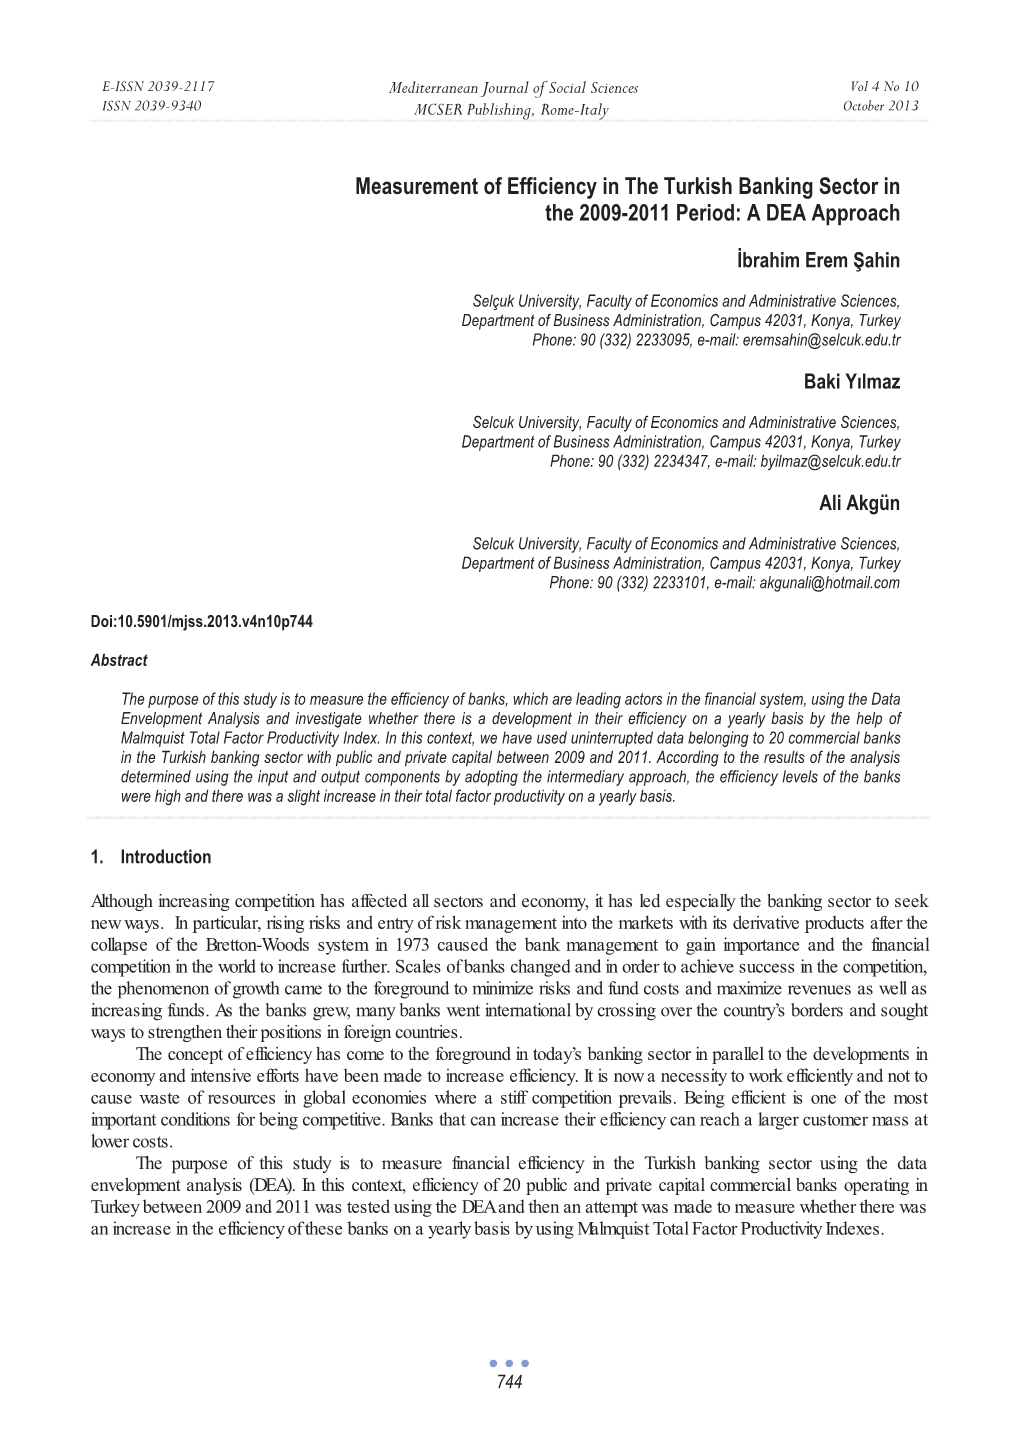 Measurement of Efficiency in the Turkish Banking Sector in the 2009-2011 Period: a DEA Approach